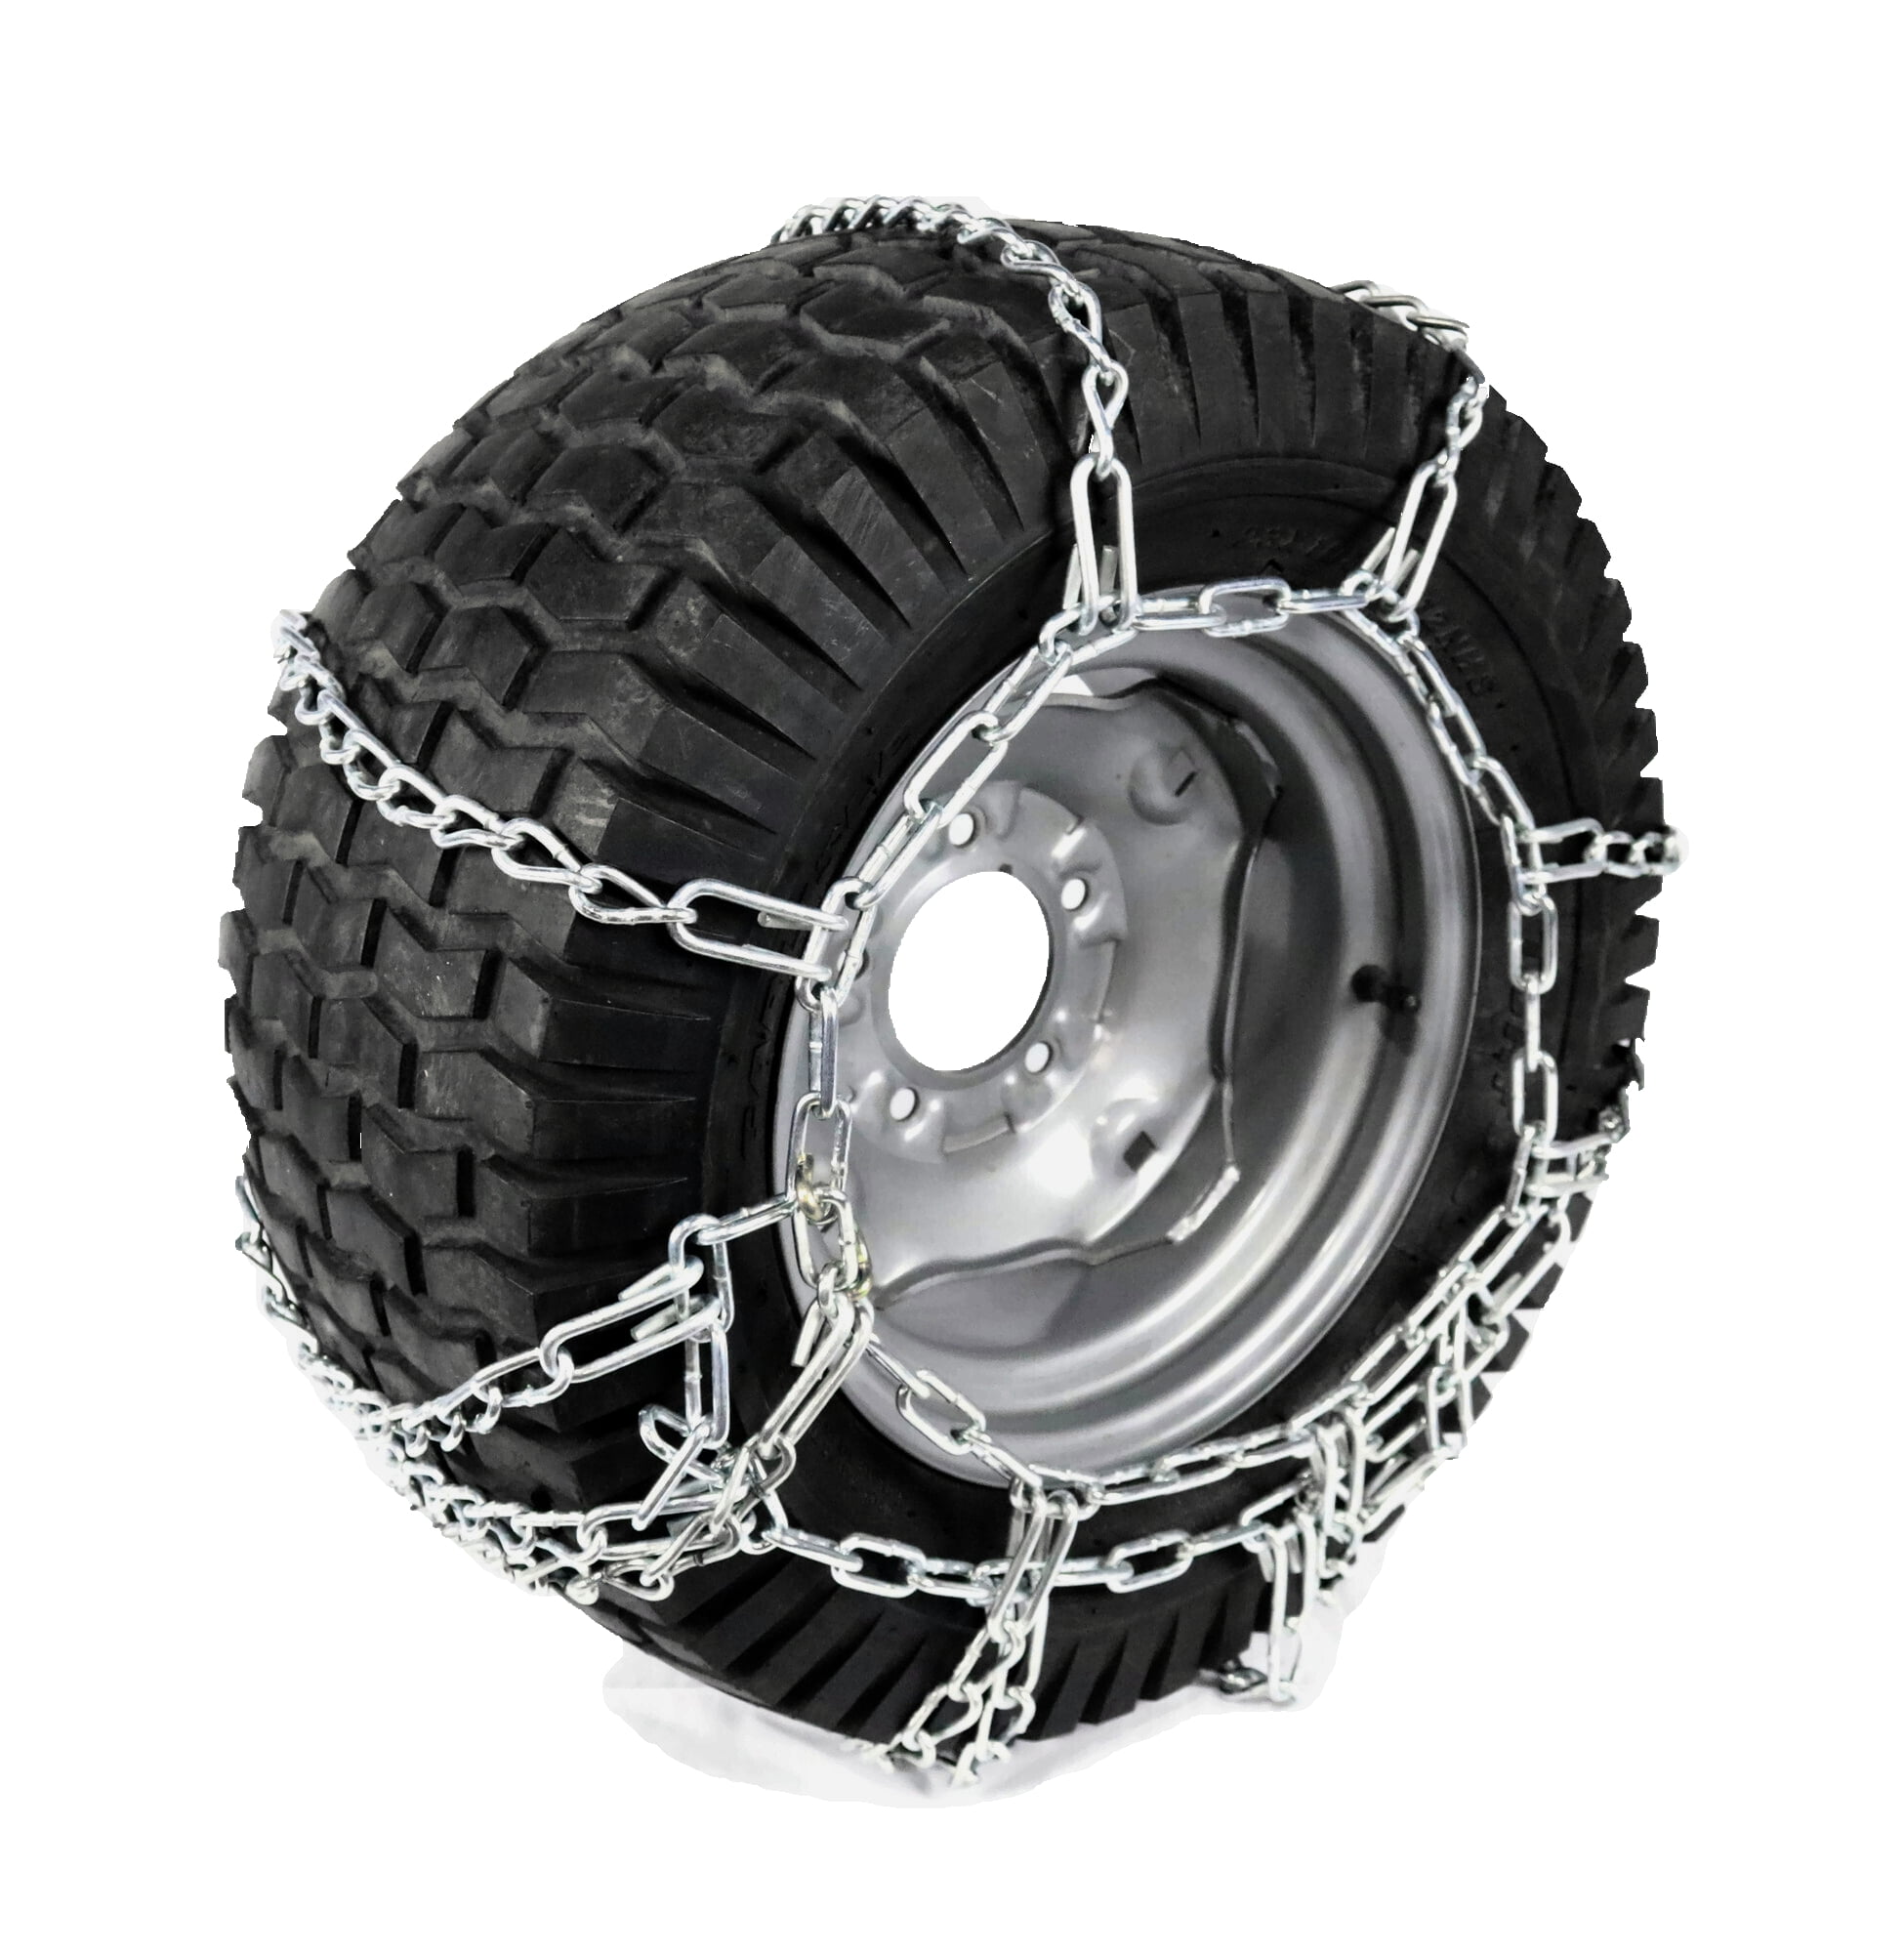 PAIR 2 Link TIRE CHAINS 18x6.50x8 for Simplicty Lawn Mower Garden Tractor Rider 